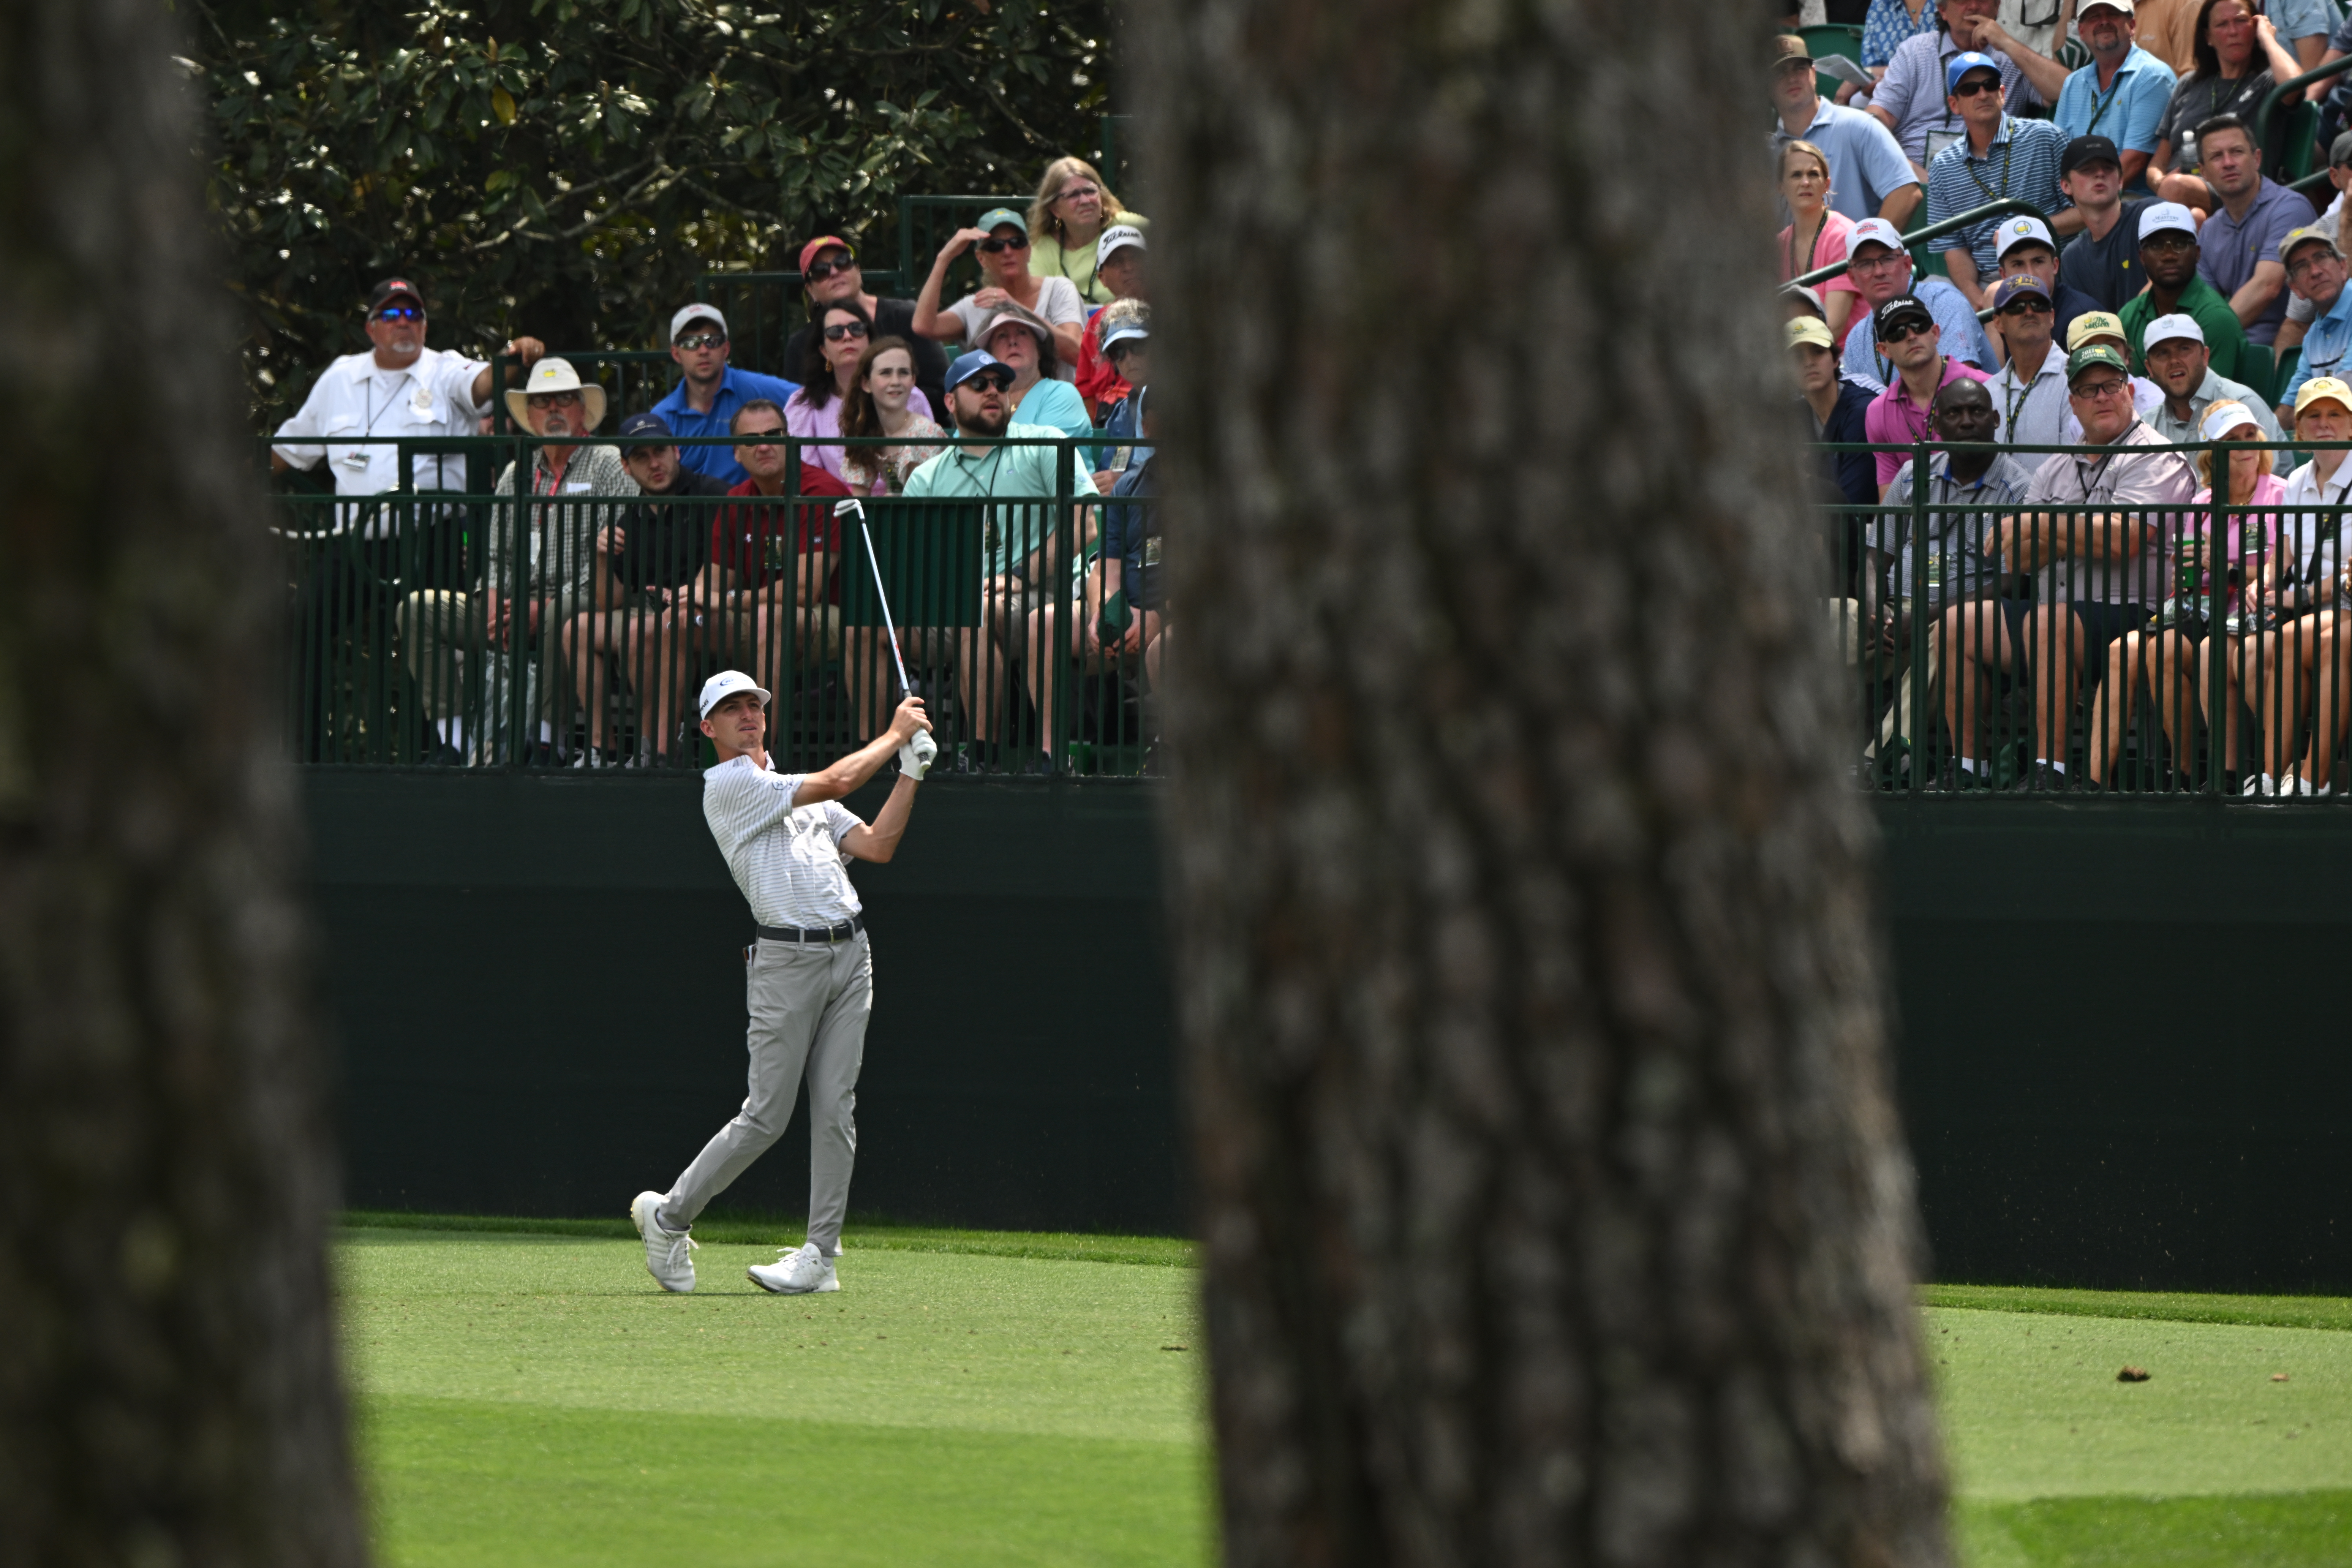 Sam Bennett, a small-town amateur with big ideas, shakes up Masters pic pic